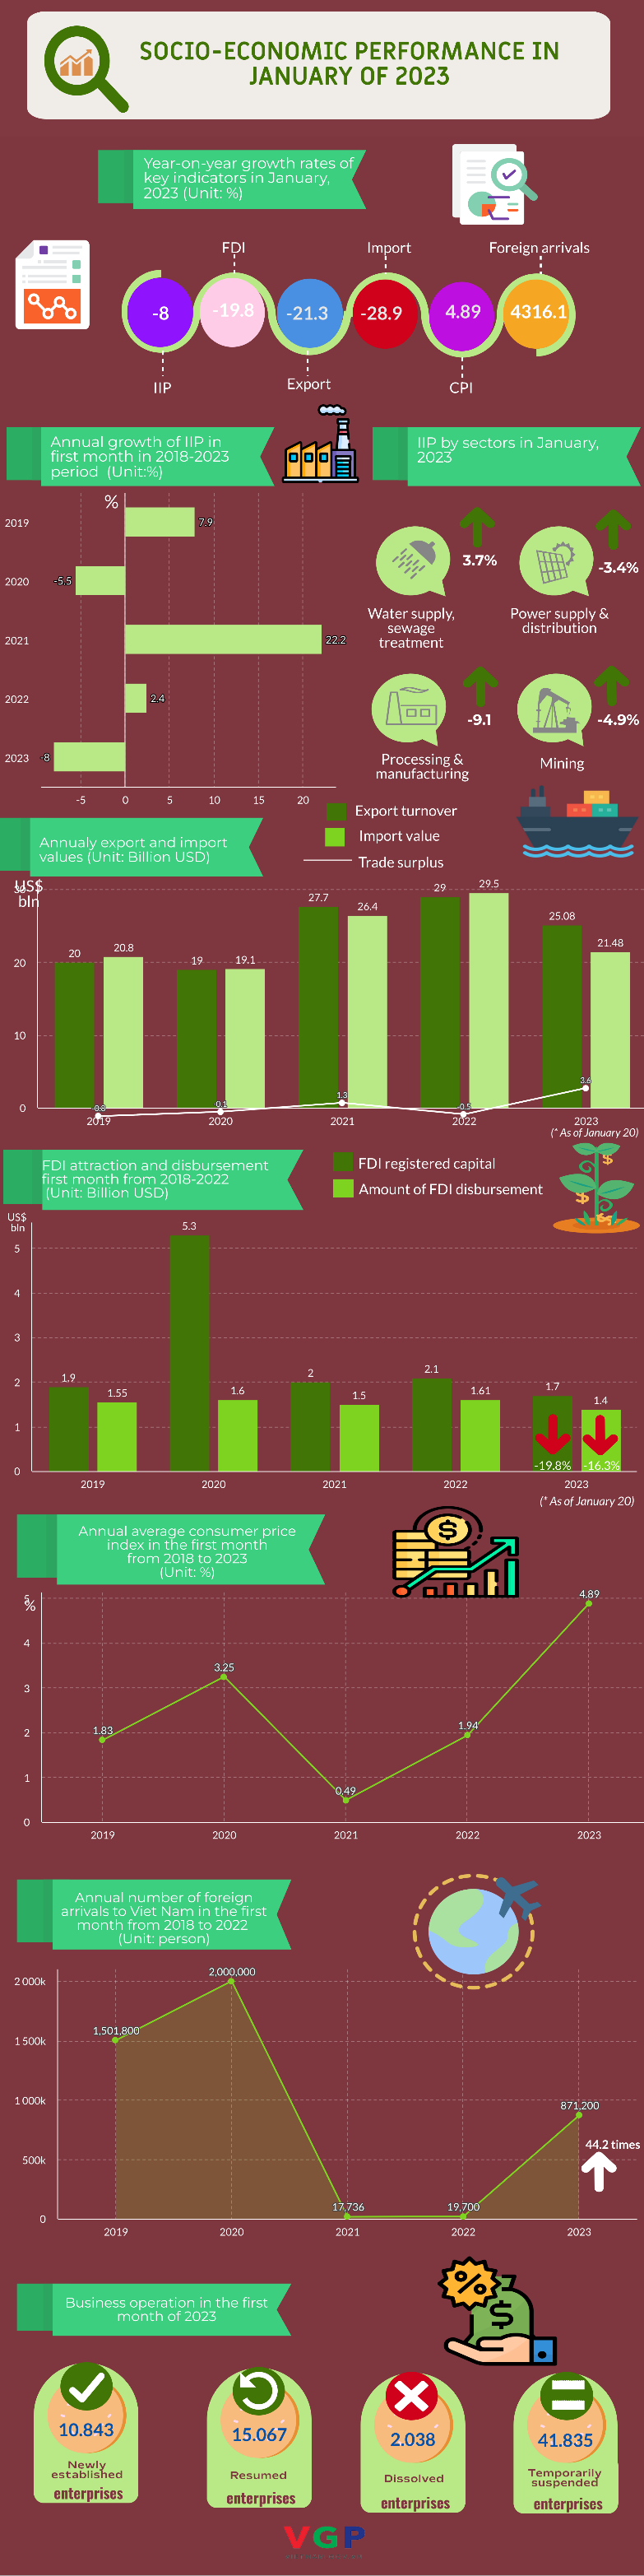 INFOGRAPHIC: SOCIAL-ECONOMIC SITUATION IN FIRST MONTH OF 2023 - Ảnh 1.